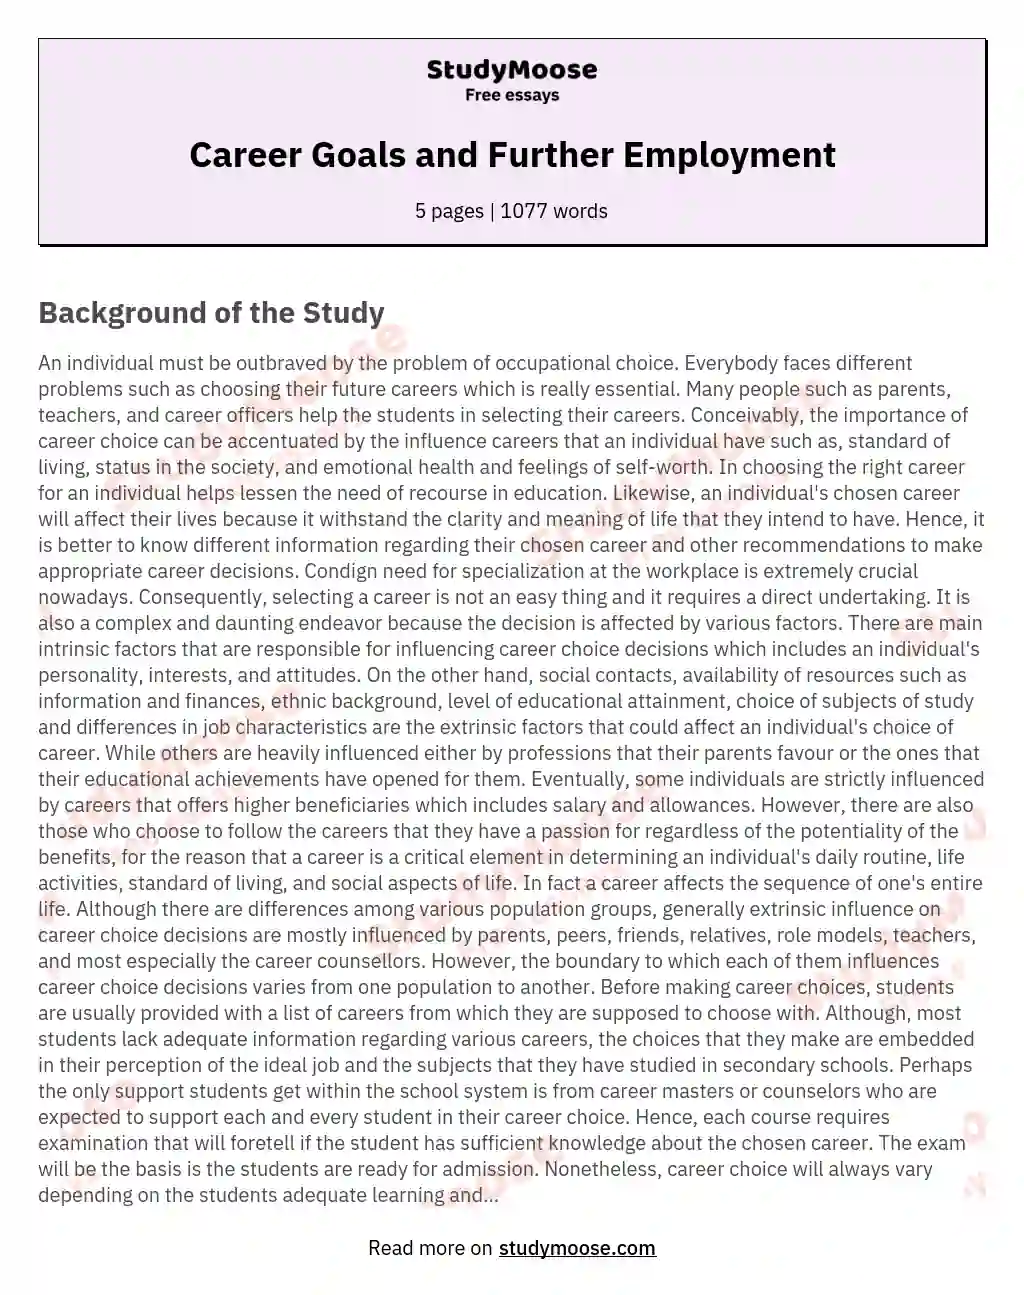 Career Goals and Further Employment